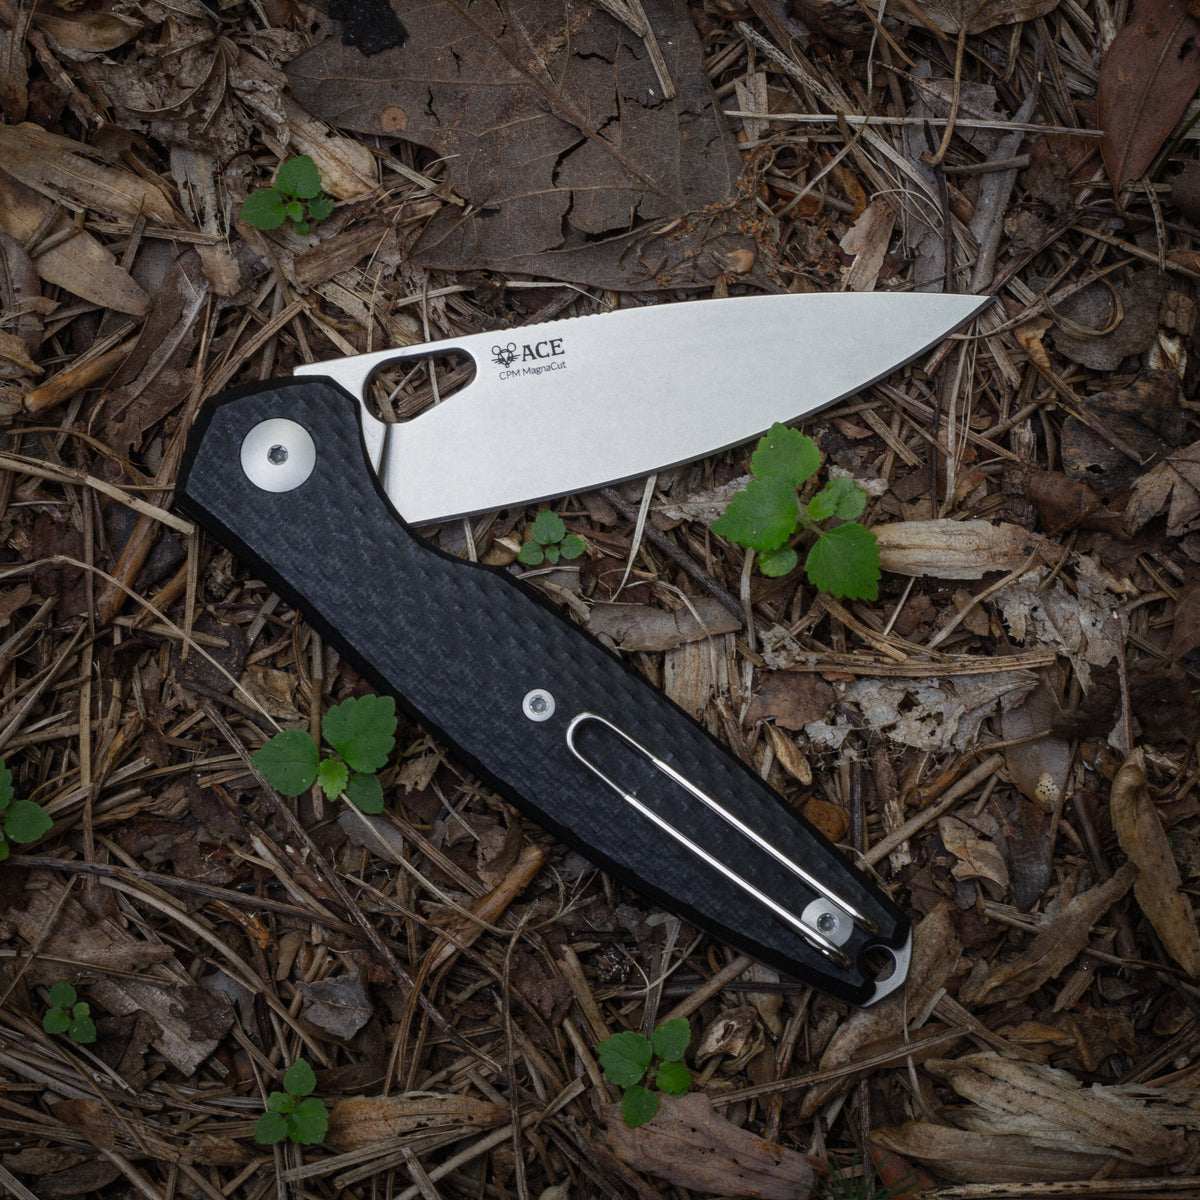 The Company, Business, And Legacy Of Cold Steel Knife And Tools